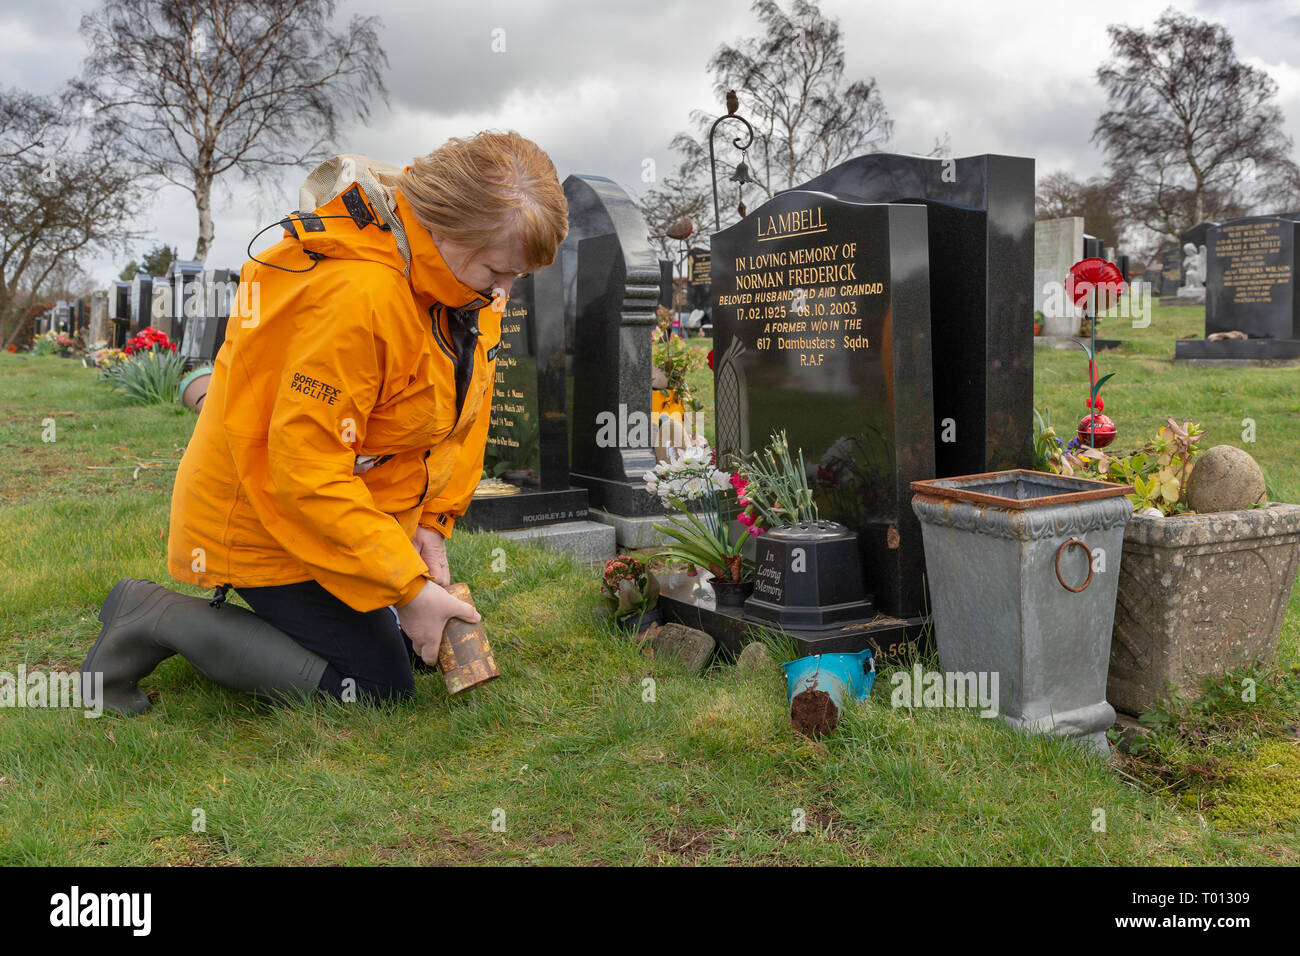 Mature lady plants the ashes of a loved pet into a hole dug in the grave of the animal’s owner on a windy day – Fox Covert, Red Lane, Appleton, Warrin Stock Photo